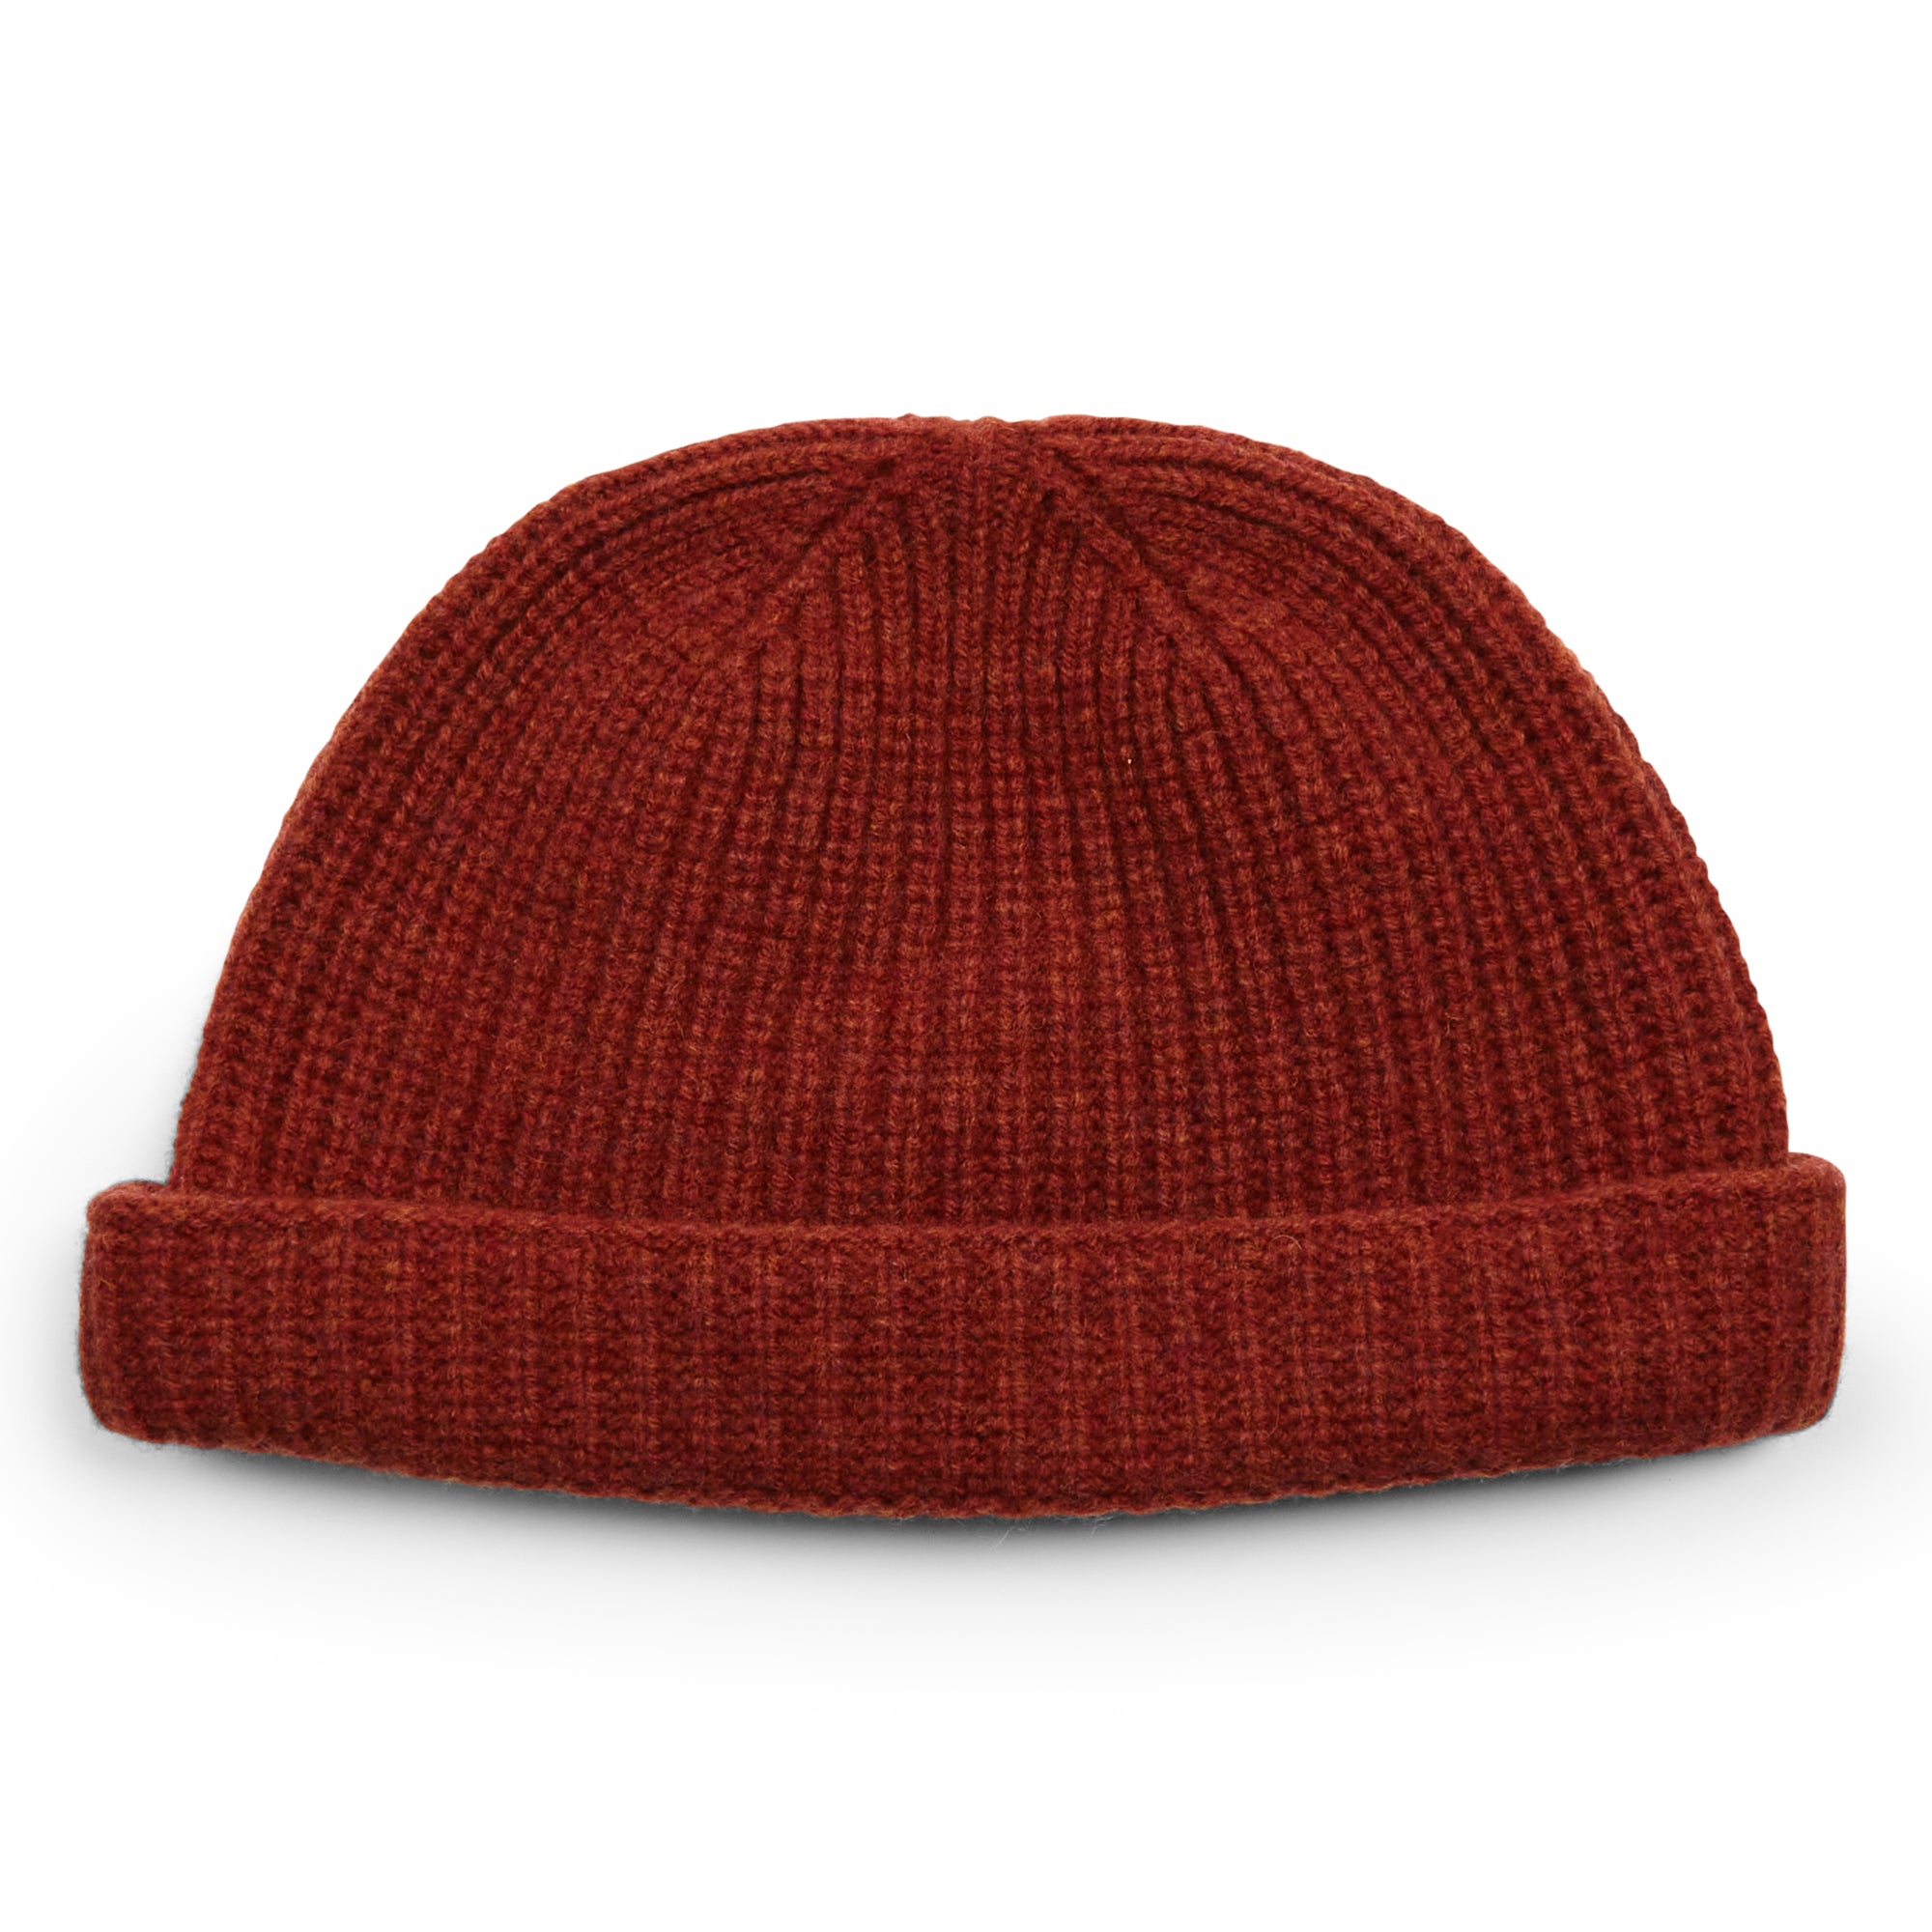 Burrows & Hare  Lambswool Beanie Hat - Rust